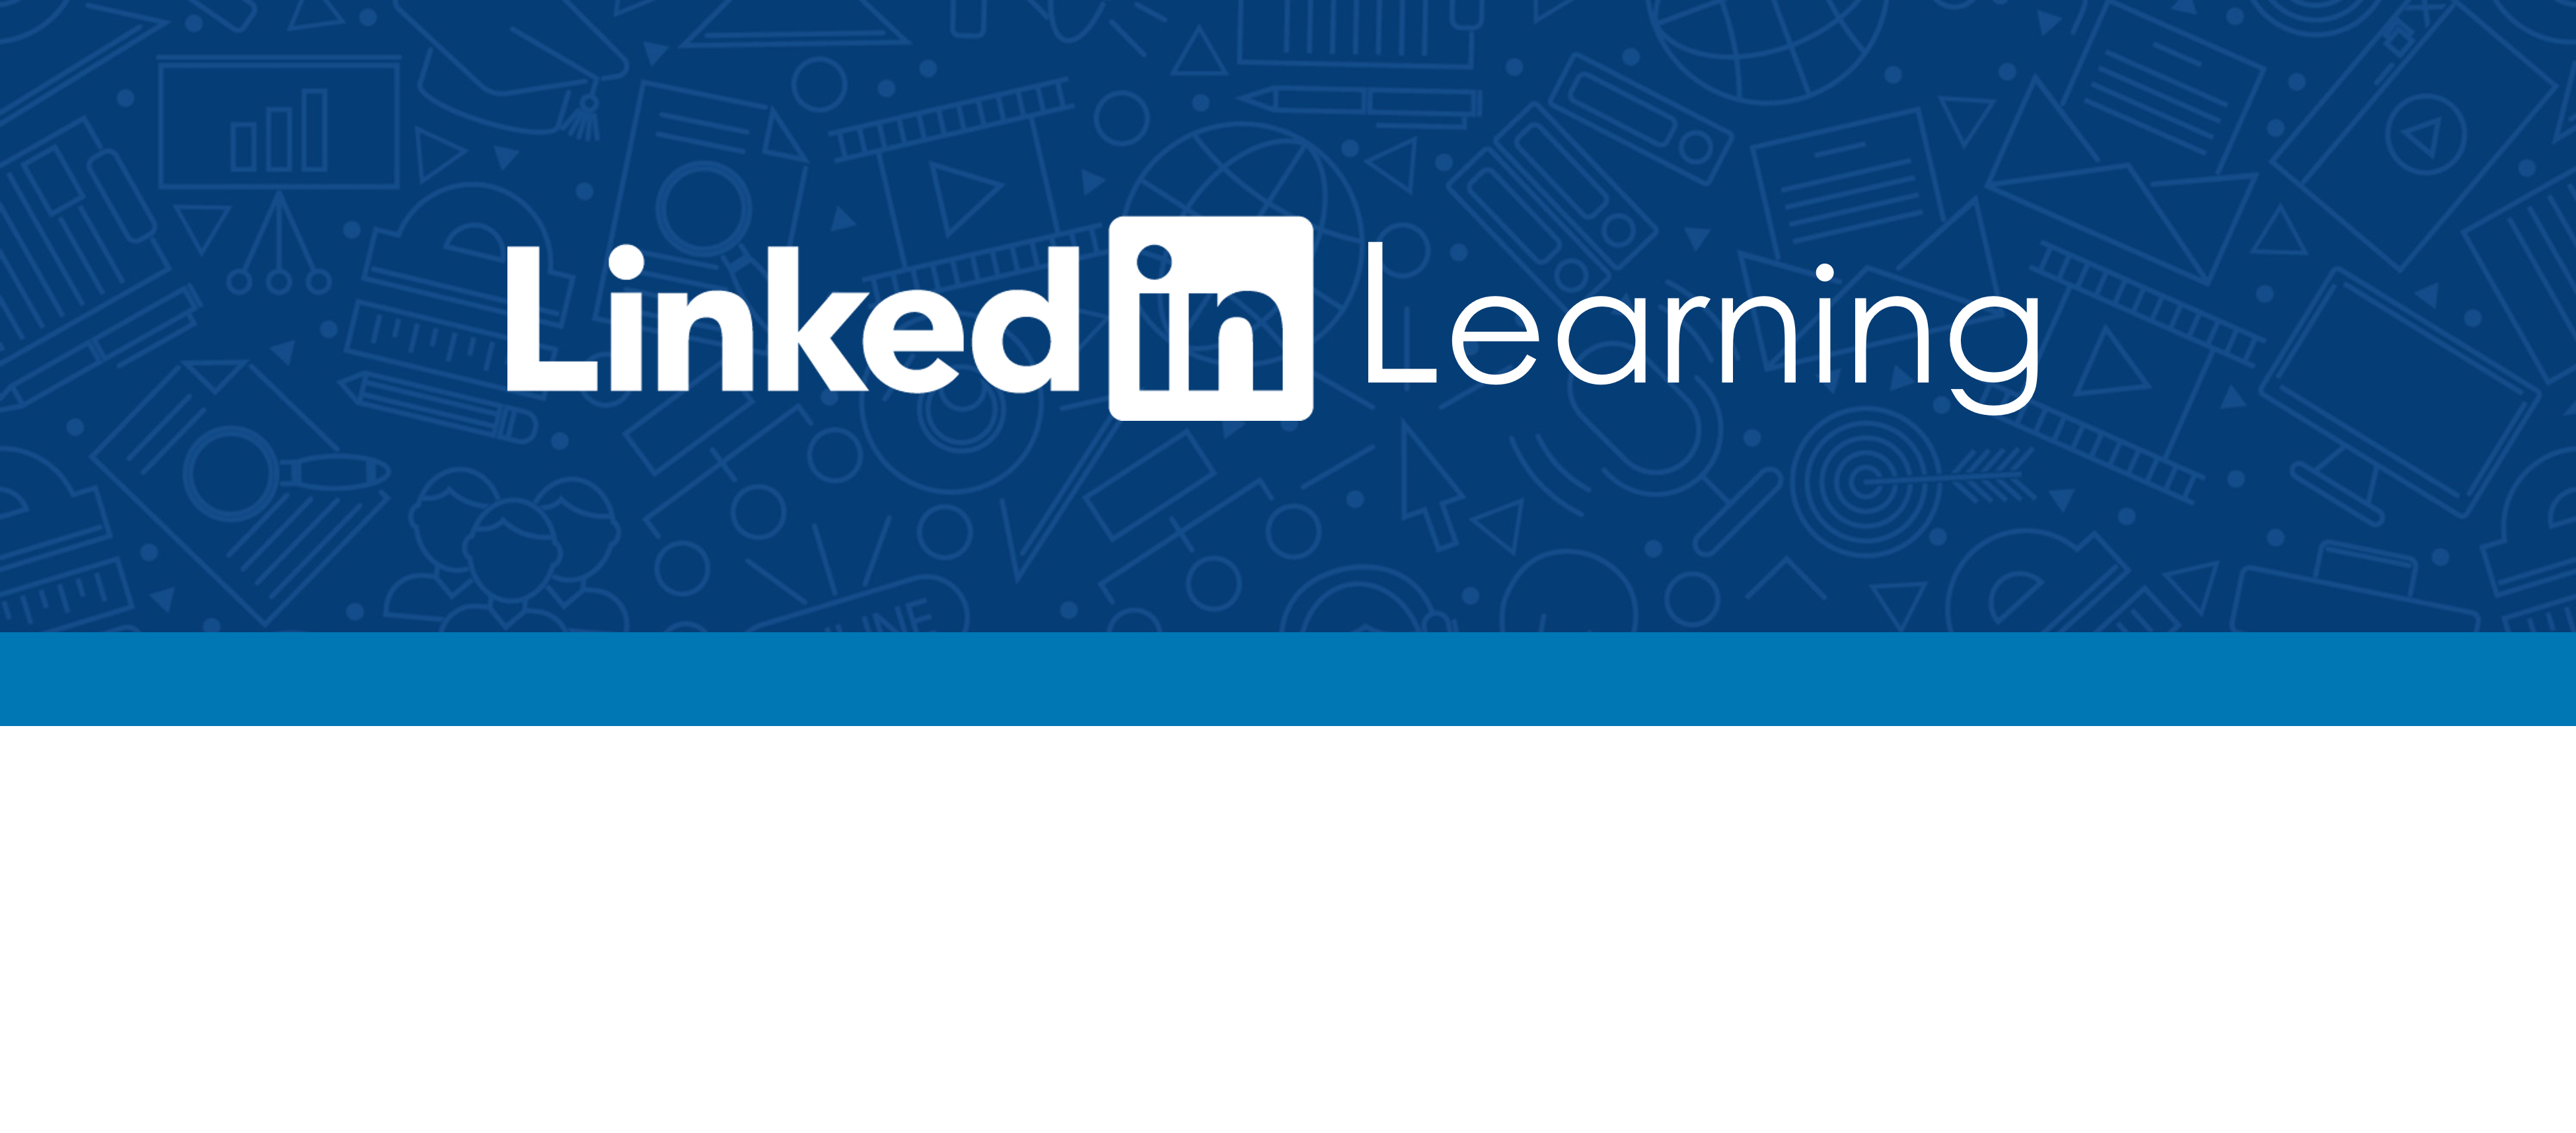 linked-in learning banner